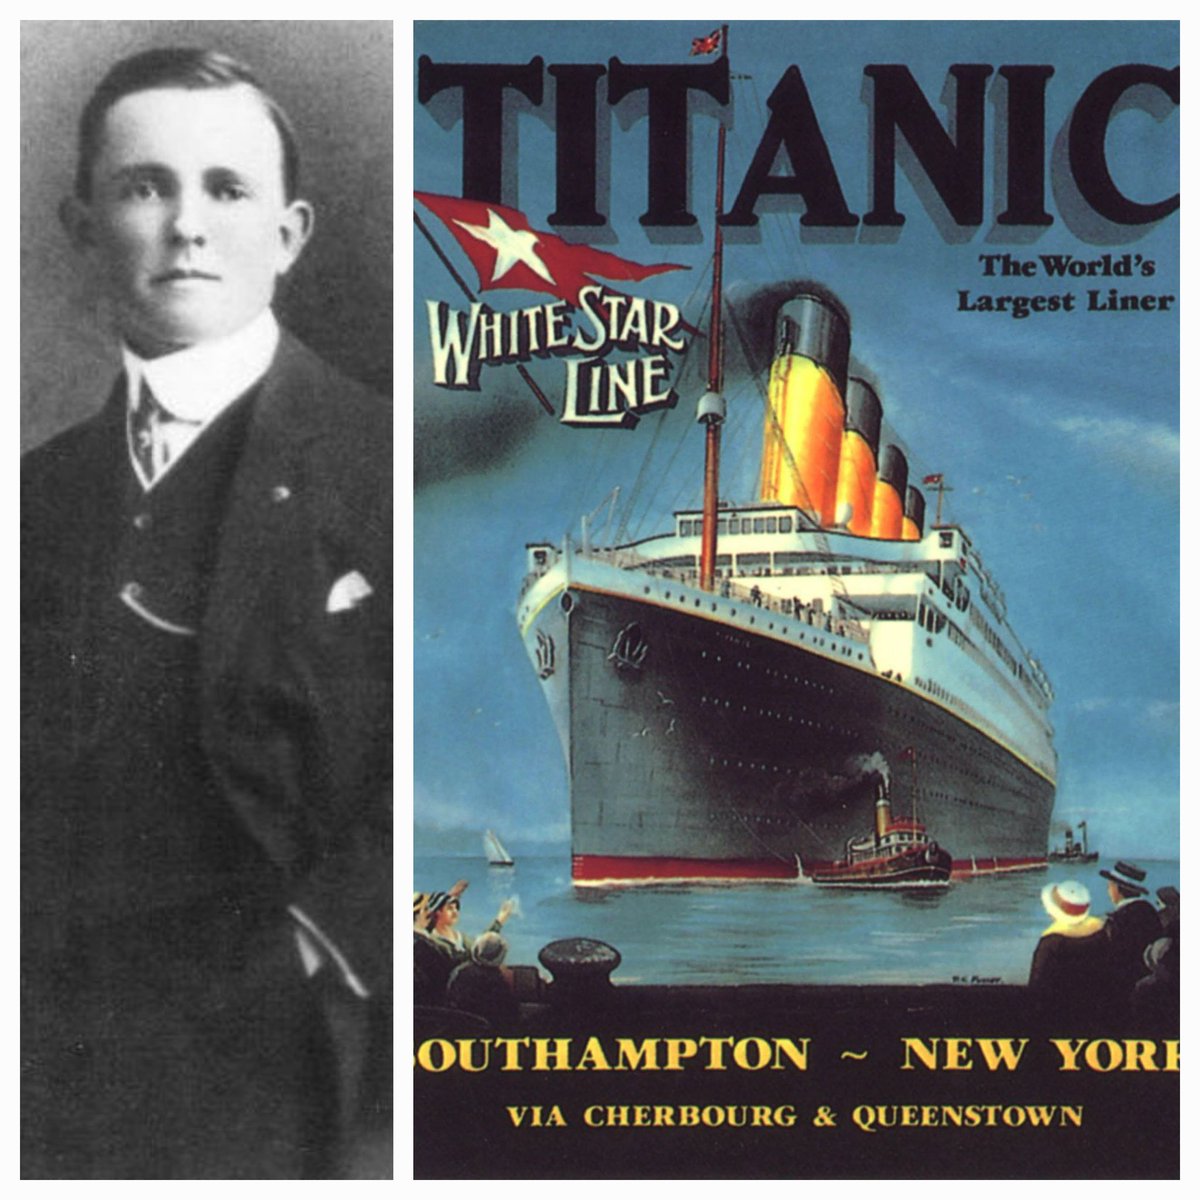 #otd in 1912 the RMS Titanic sank with the loss of nearly 1500 lives , one survivor was young Daniel Buckley from Cork who sought to make his fortune in America. Buckleys luck wouldn't last as he died in WW1 serving for his newly adopted country.